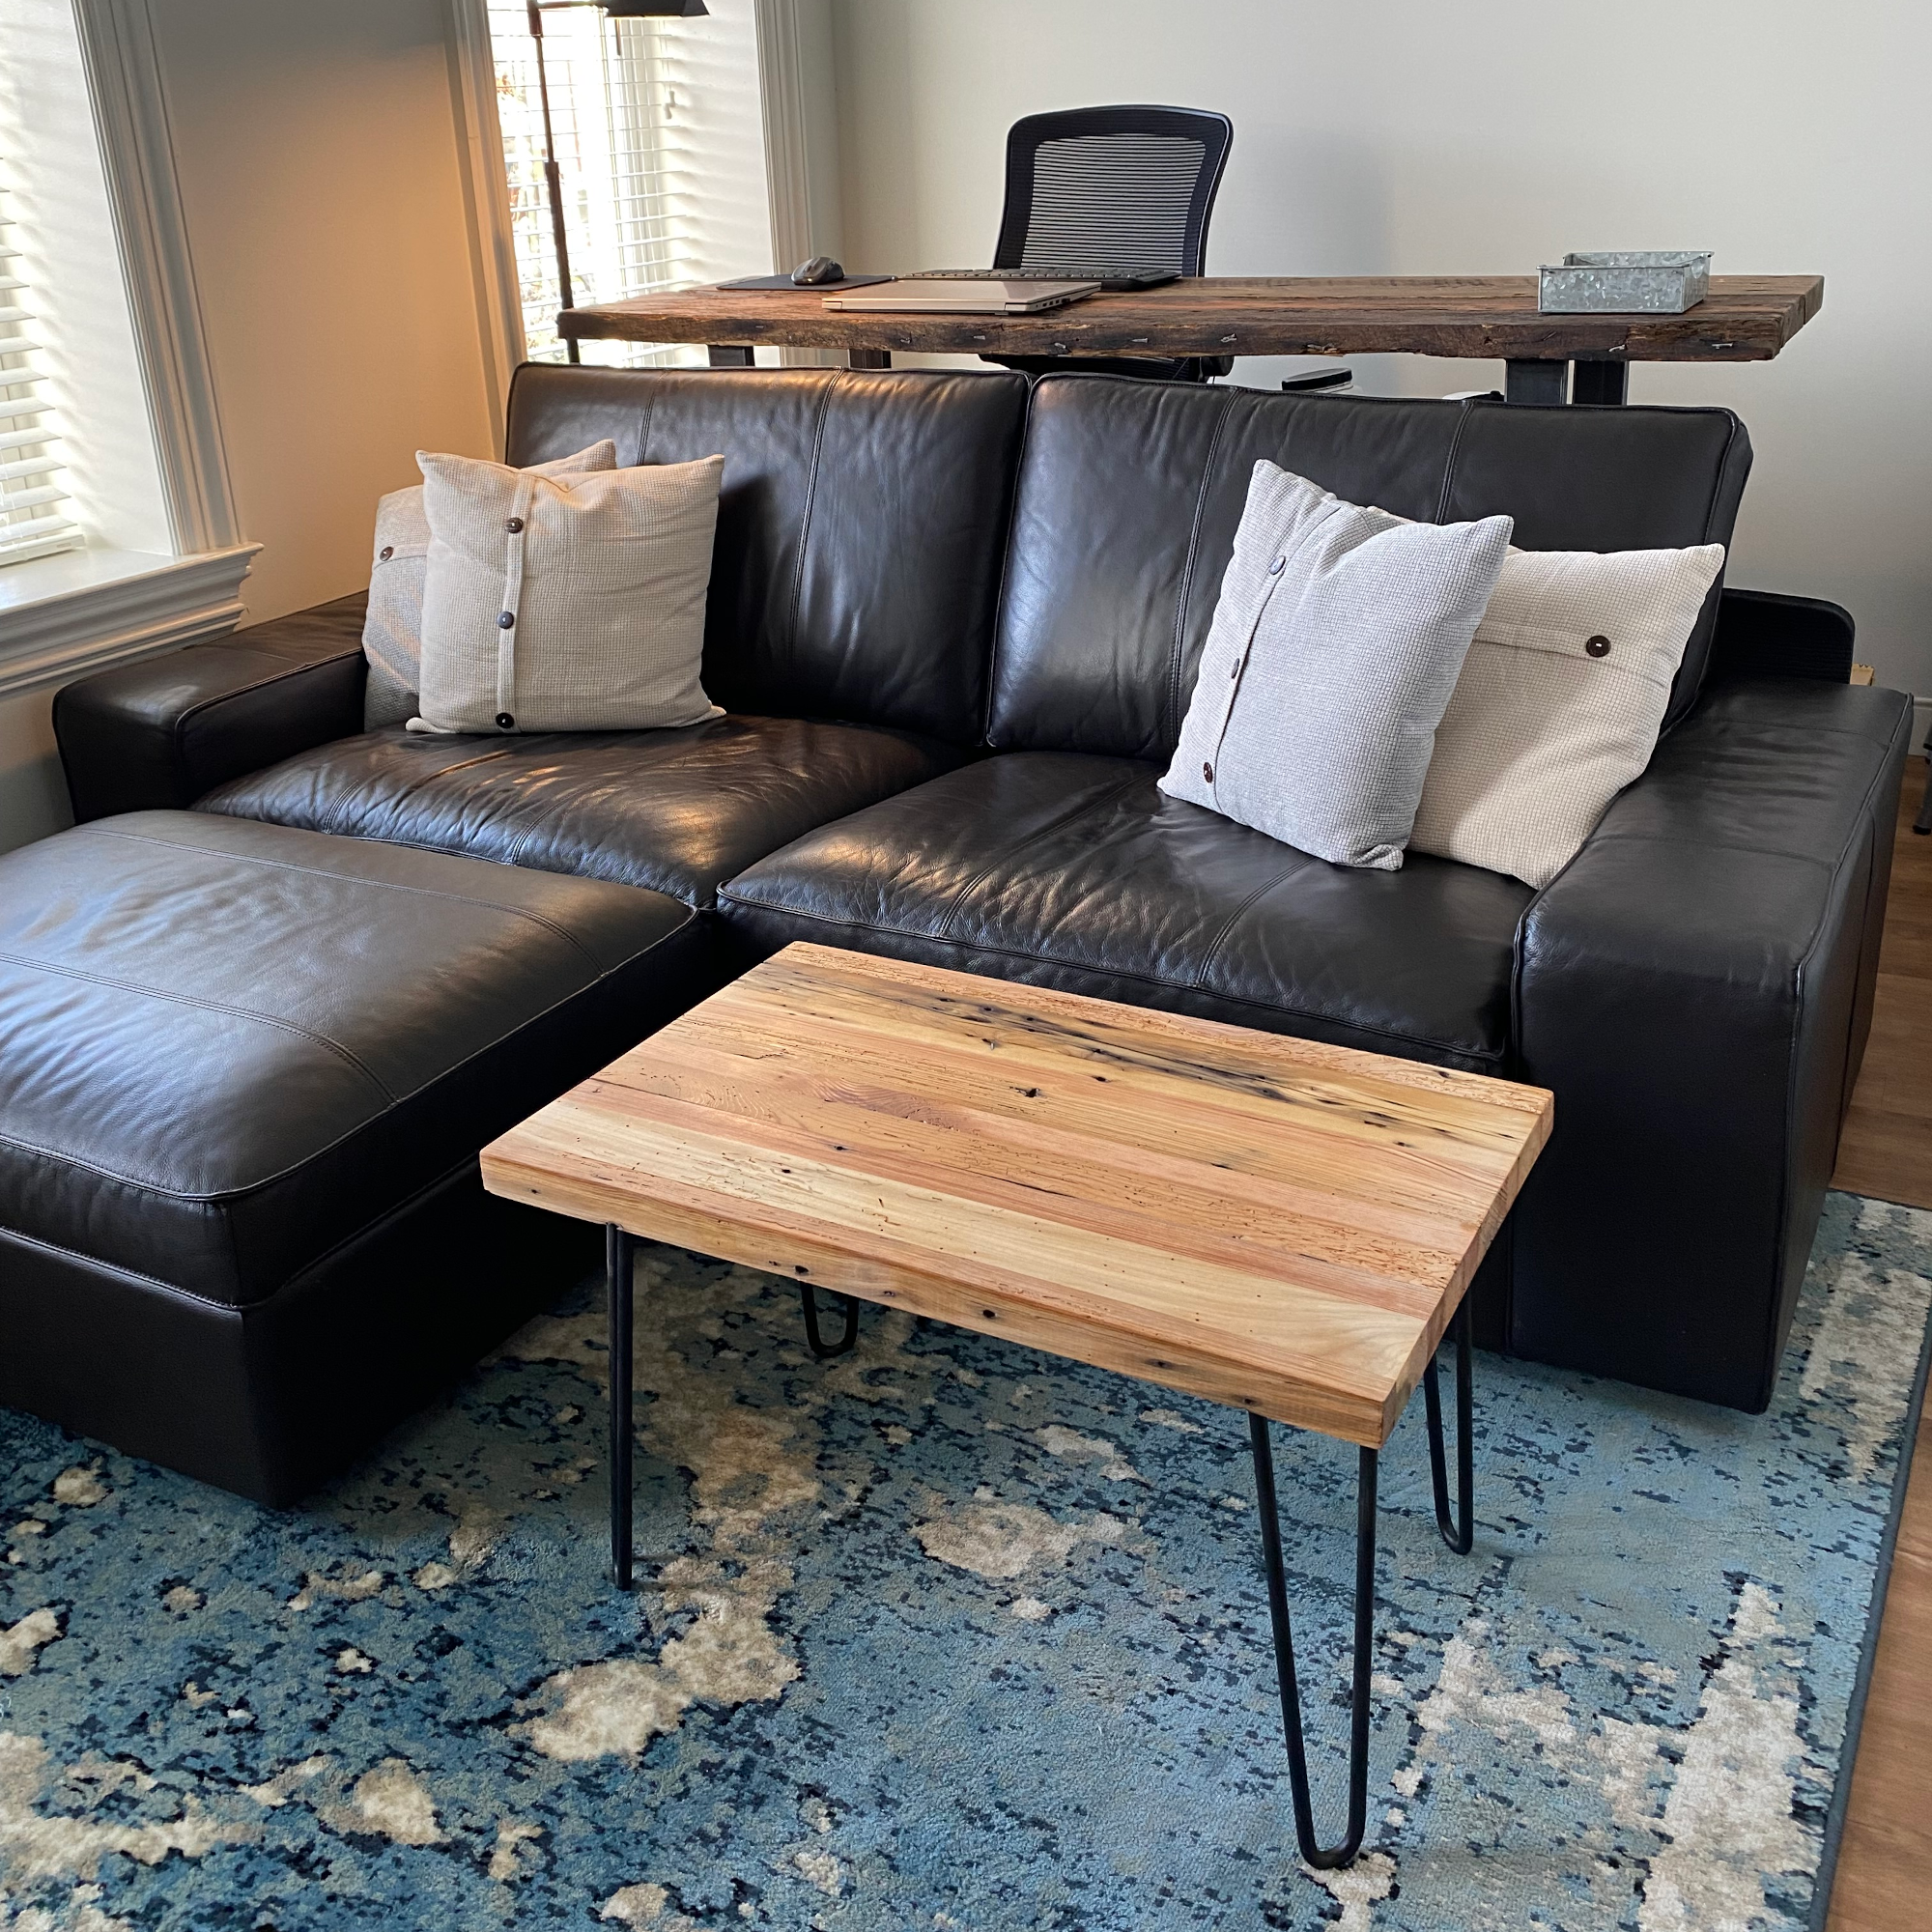 A reclaimed wood coffee table with hair pin legs in a wider view and living room setting. The view shows variations in the wood and rustic characteristics. The lacquer finish shown adds a slight shine.